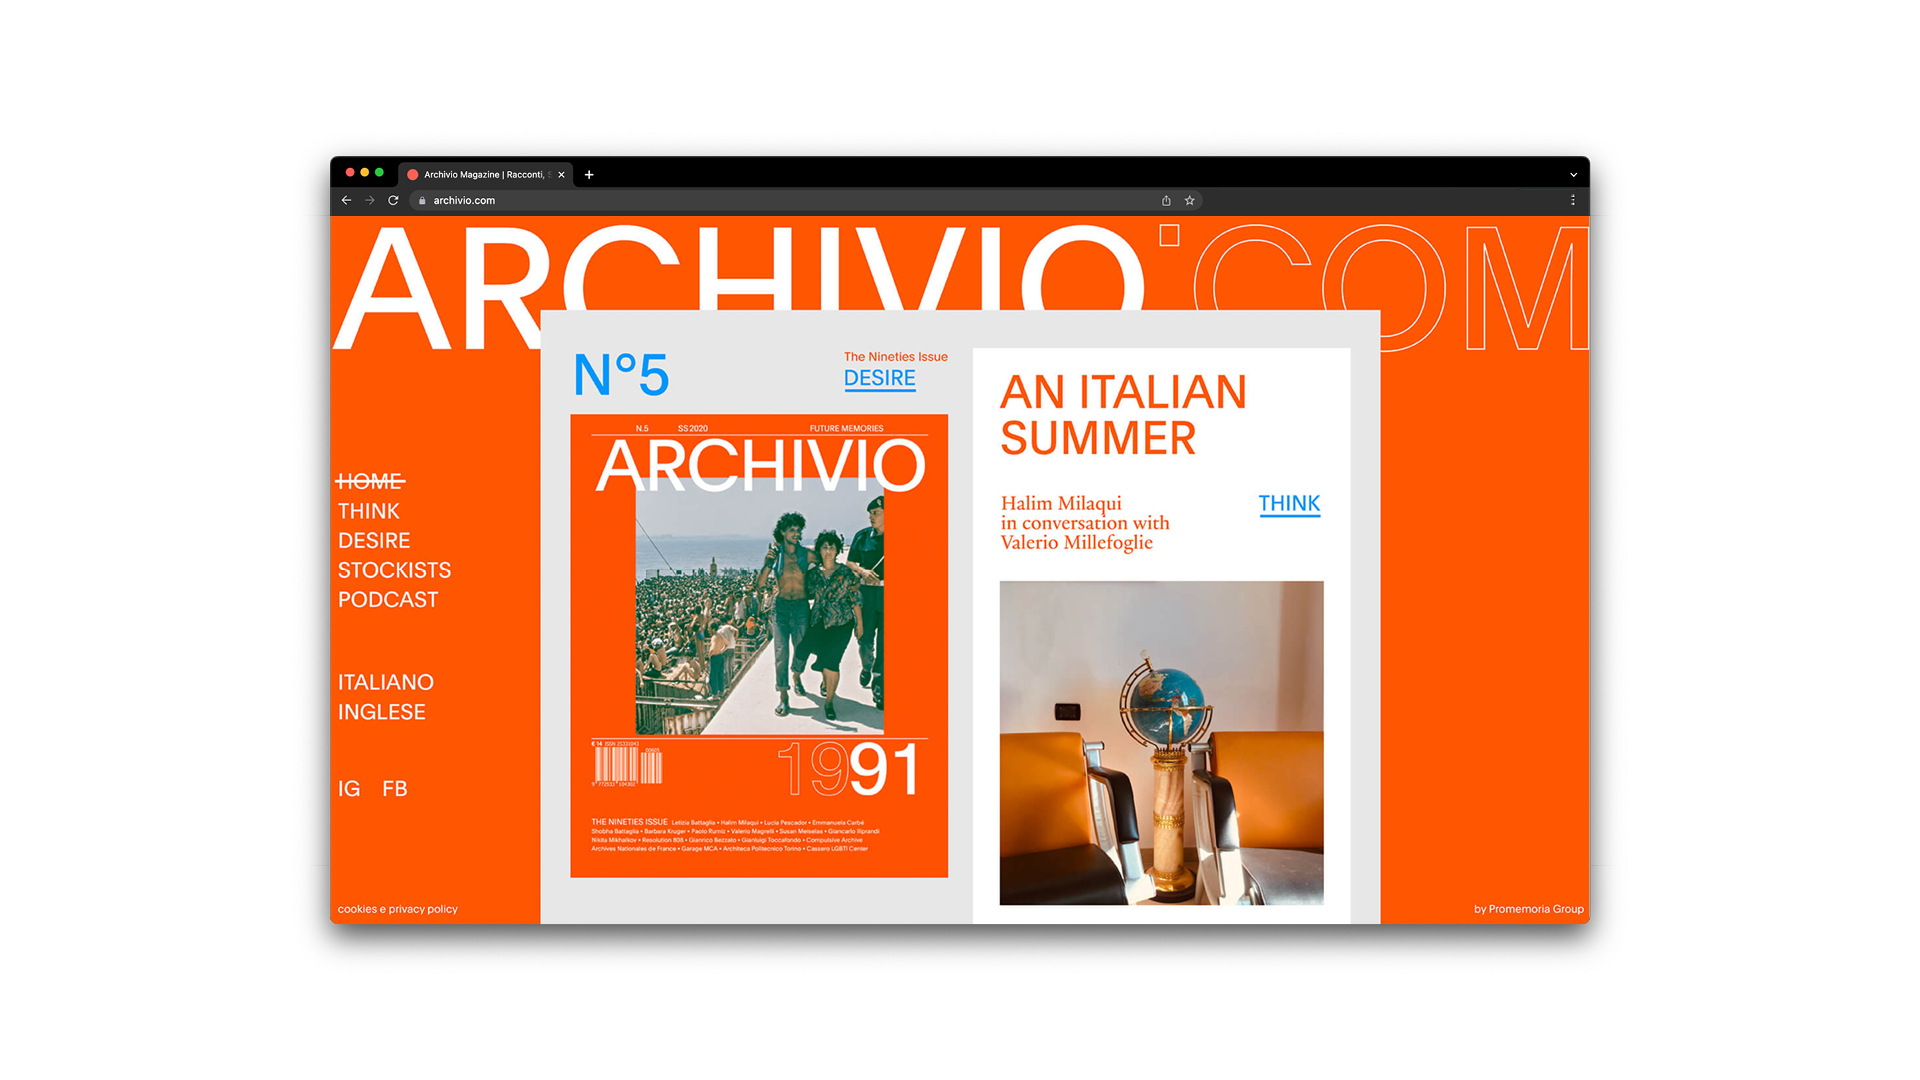 Homepage of archivio.com updated to the issue no. 5 of the magazine Archivio